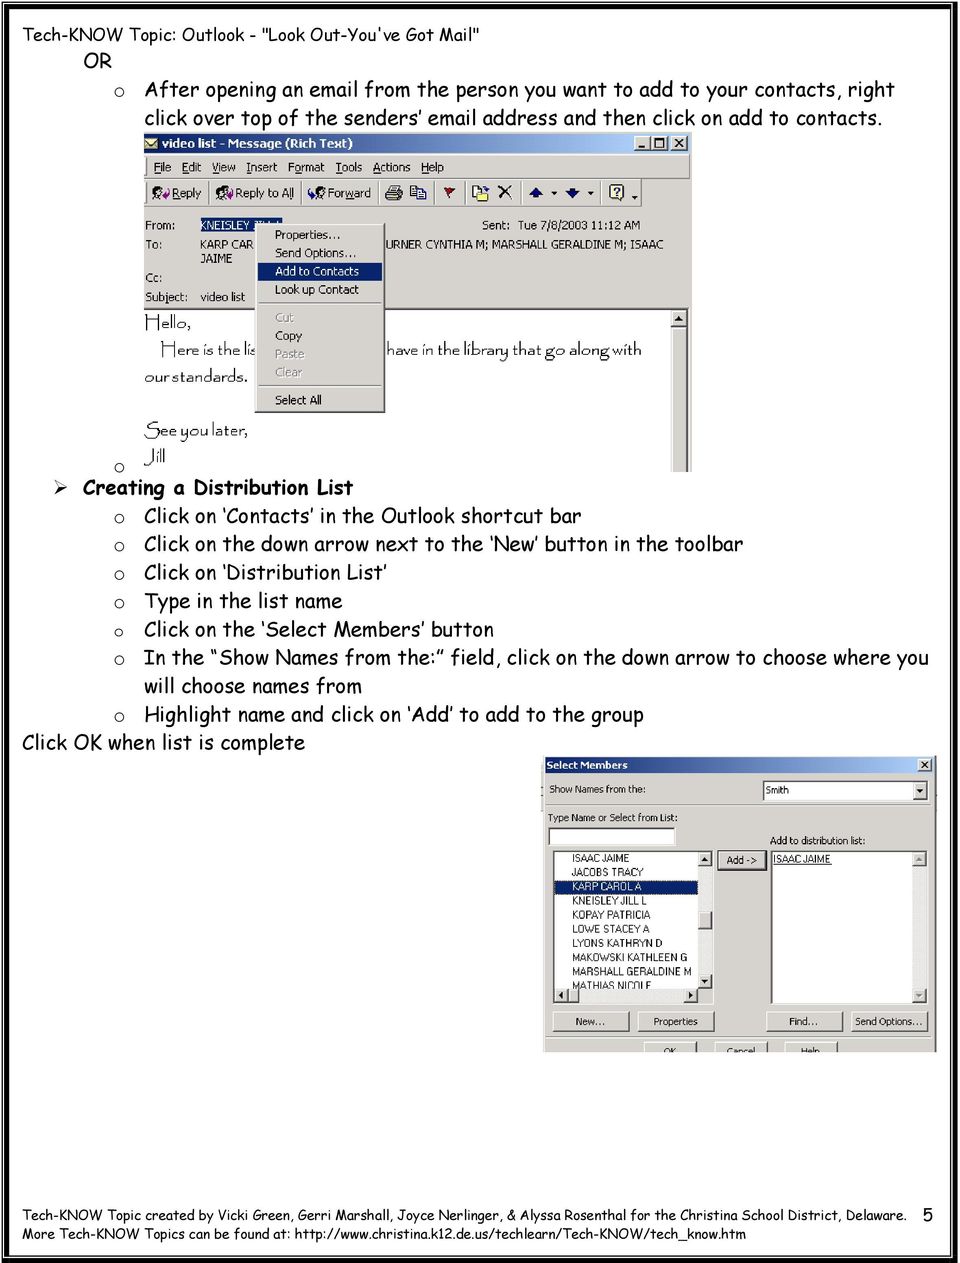 o Creating a Distribution List o Click on Contacts in the Outlook shortcut bar o Click on the down arrow next to the New button in the toolbar o